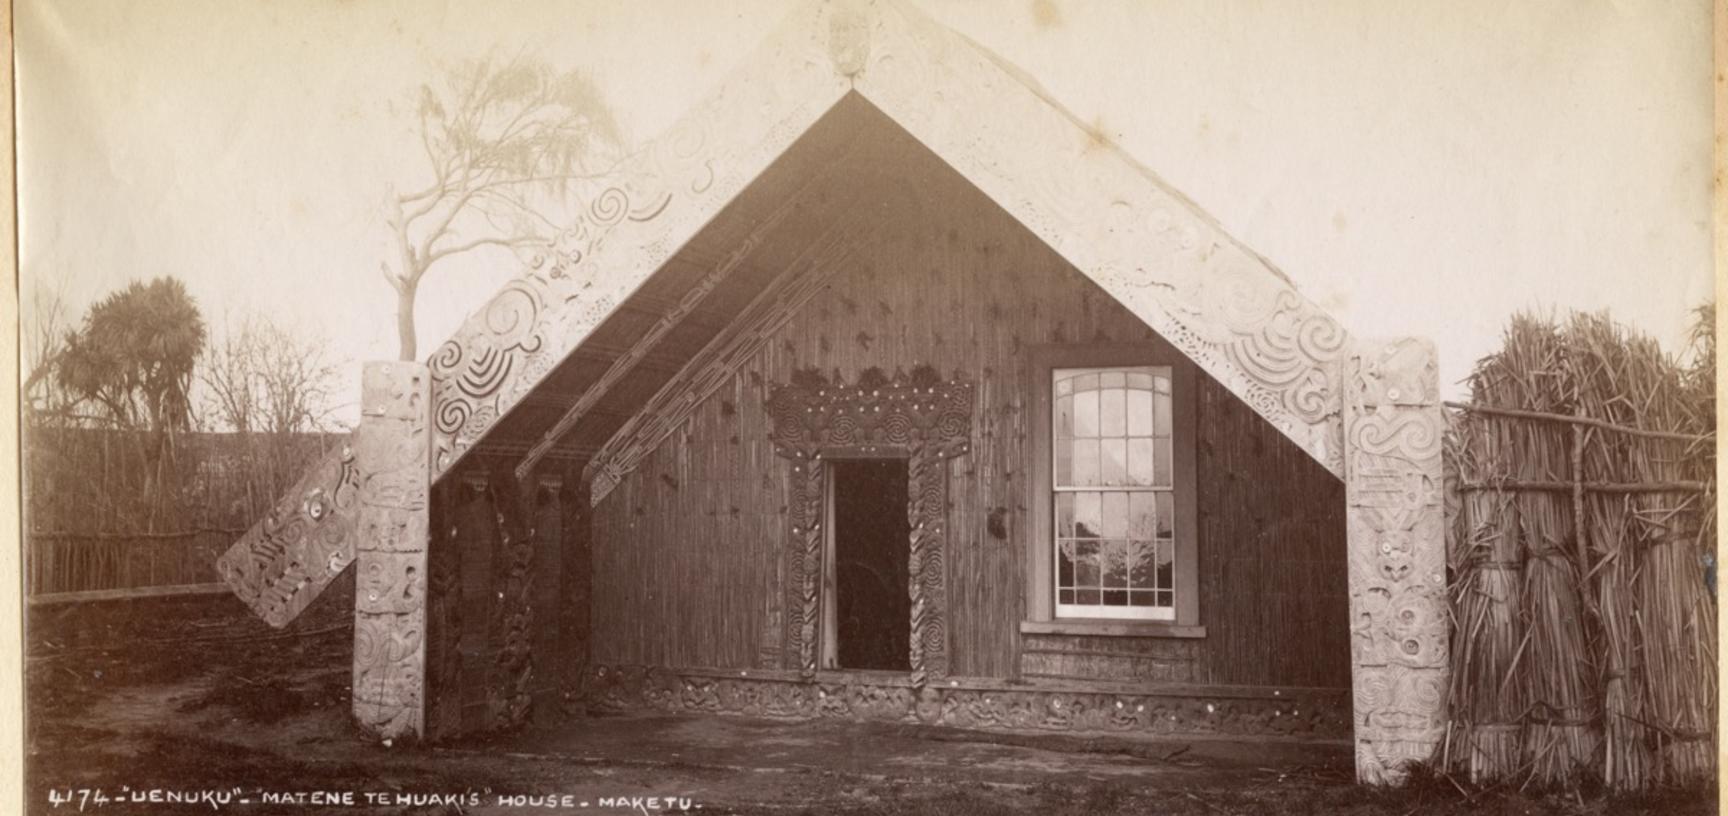 Māori house (whare) with carved and painted wooden decoration. Photograph by Alfred Burton for the Burton Brothers studio (Dunedin). North Island, New Zealand. Circa 1887.